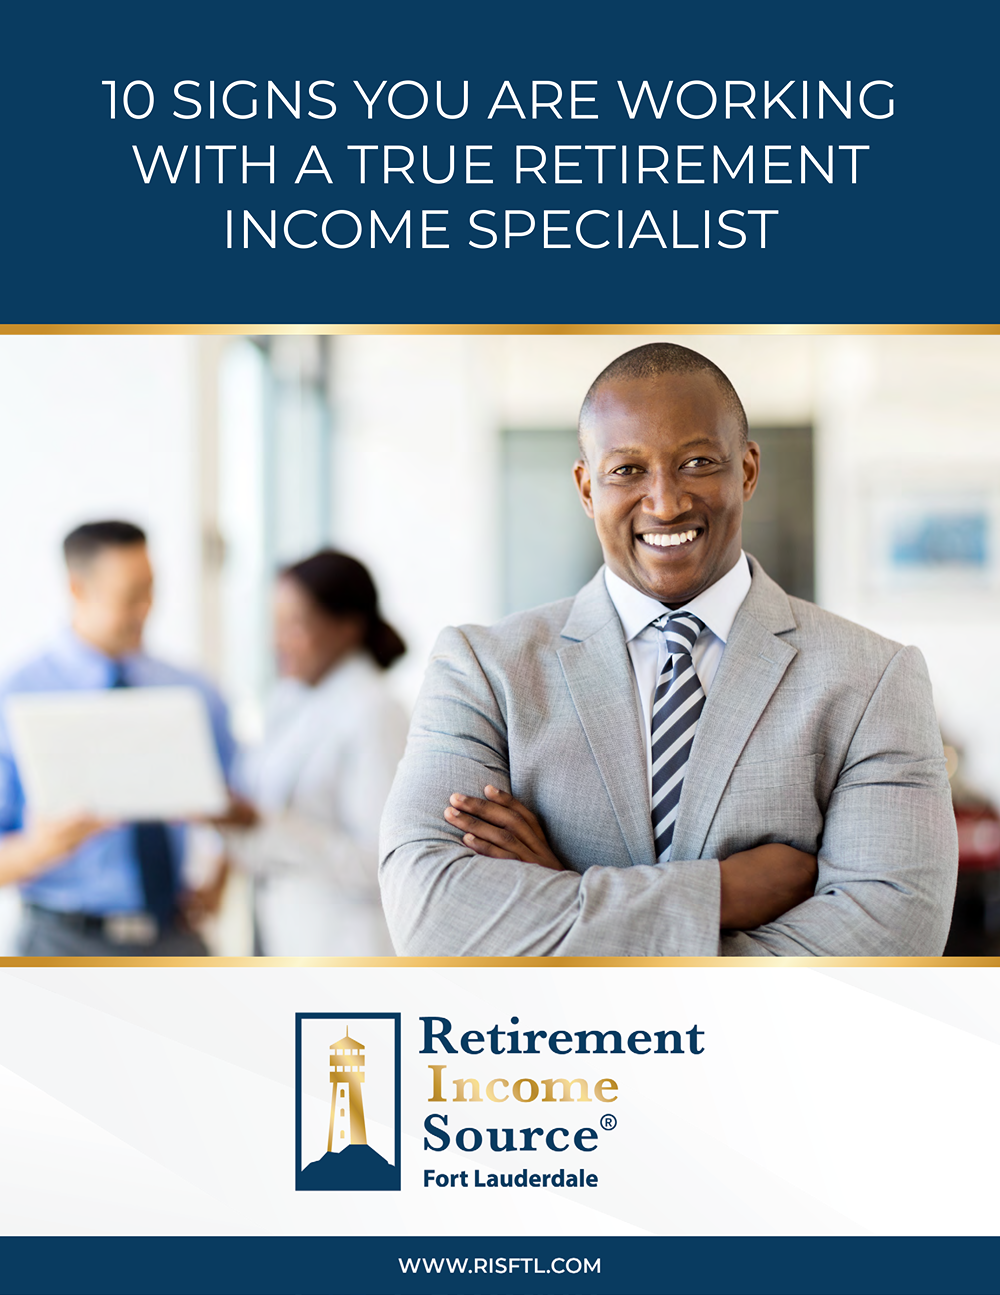 10 Signs You Are Working with a True Retirement Income Specialist